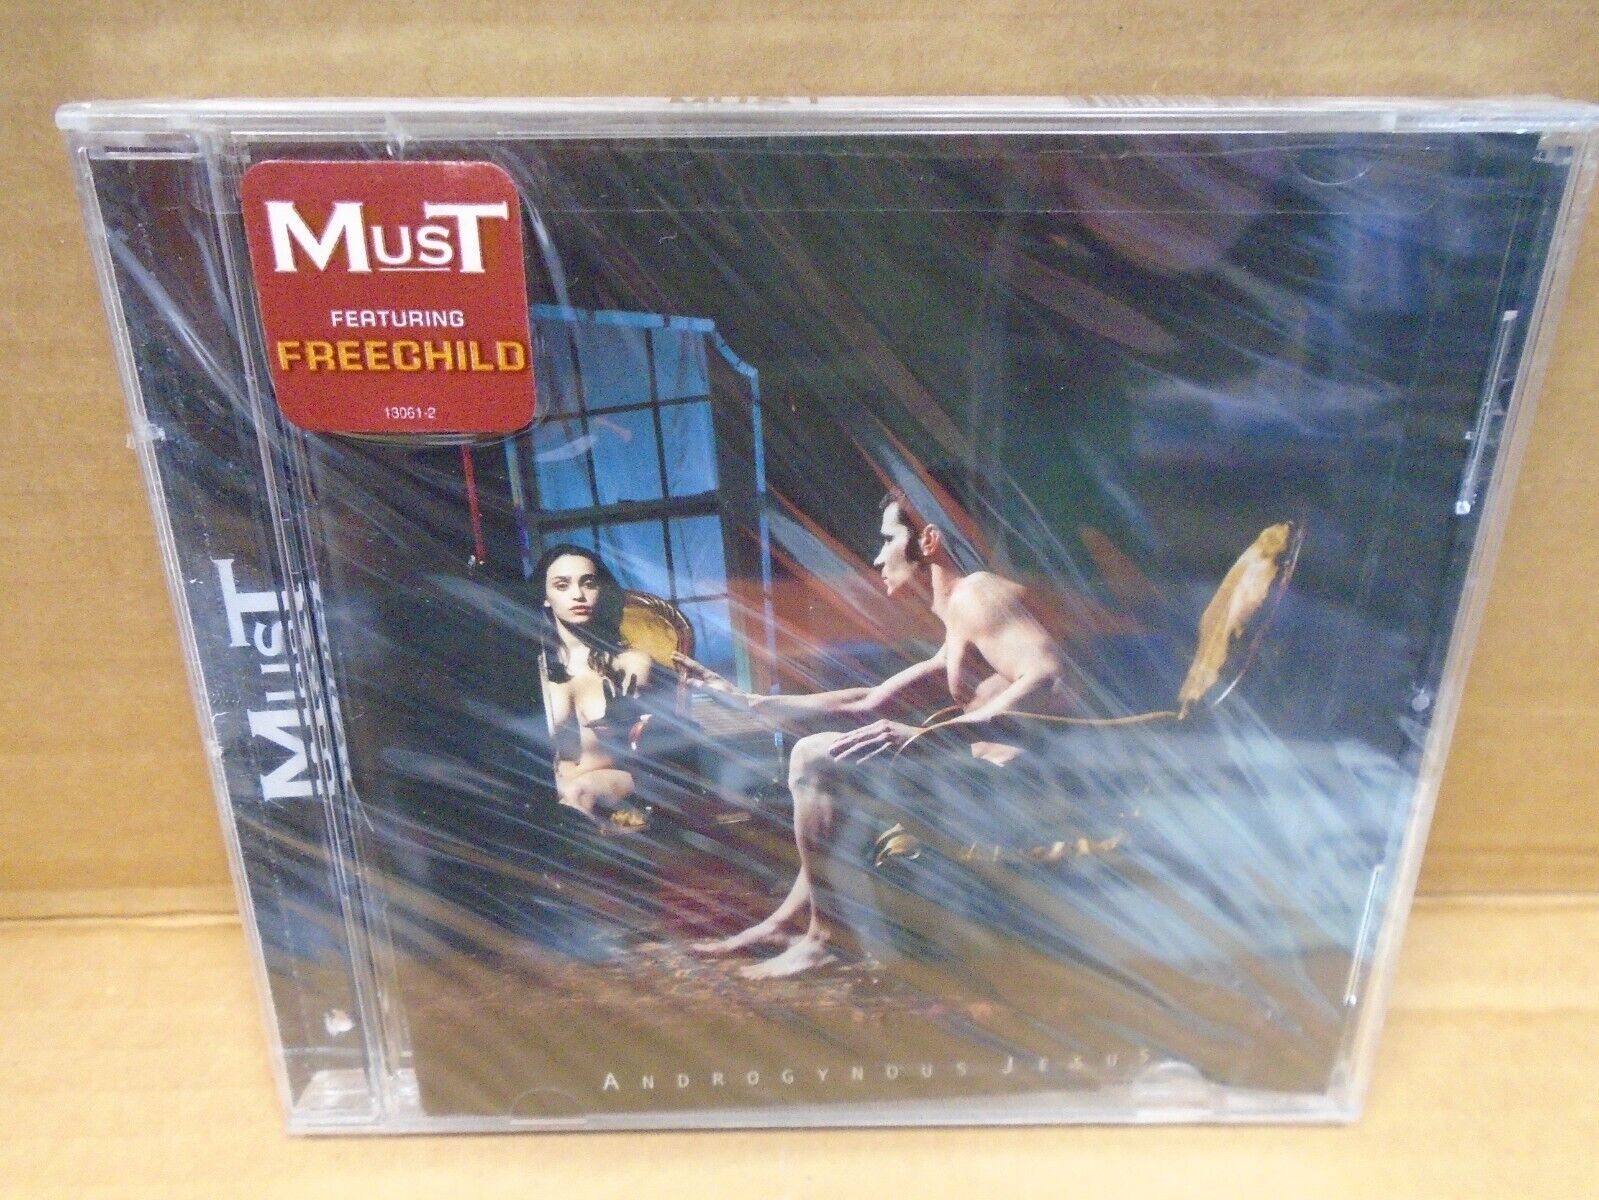 MUST Androgynous Jesus CD NEW 2002 Wind Up sealed w/ Song Sticker [Heavy Metal]